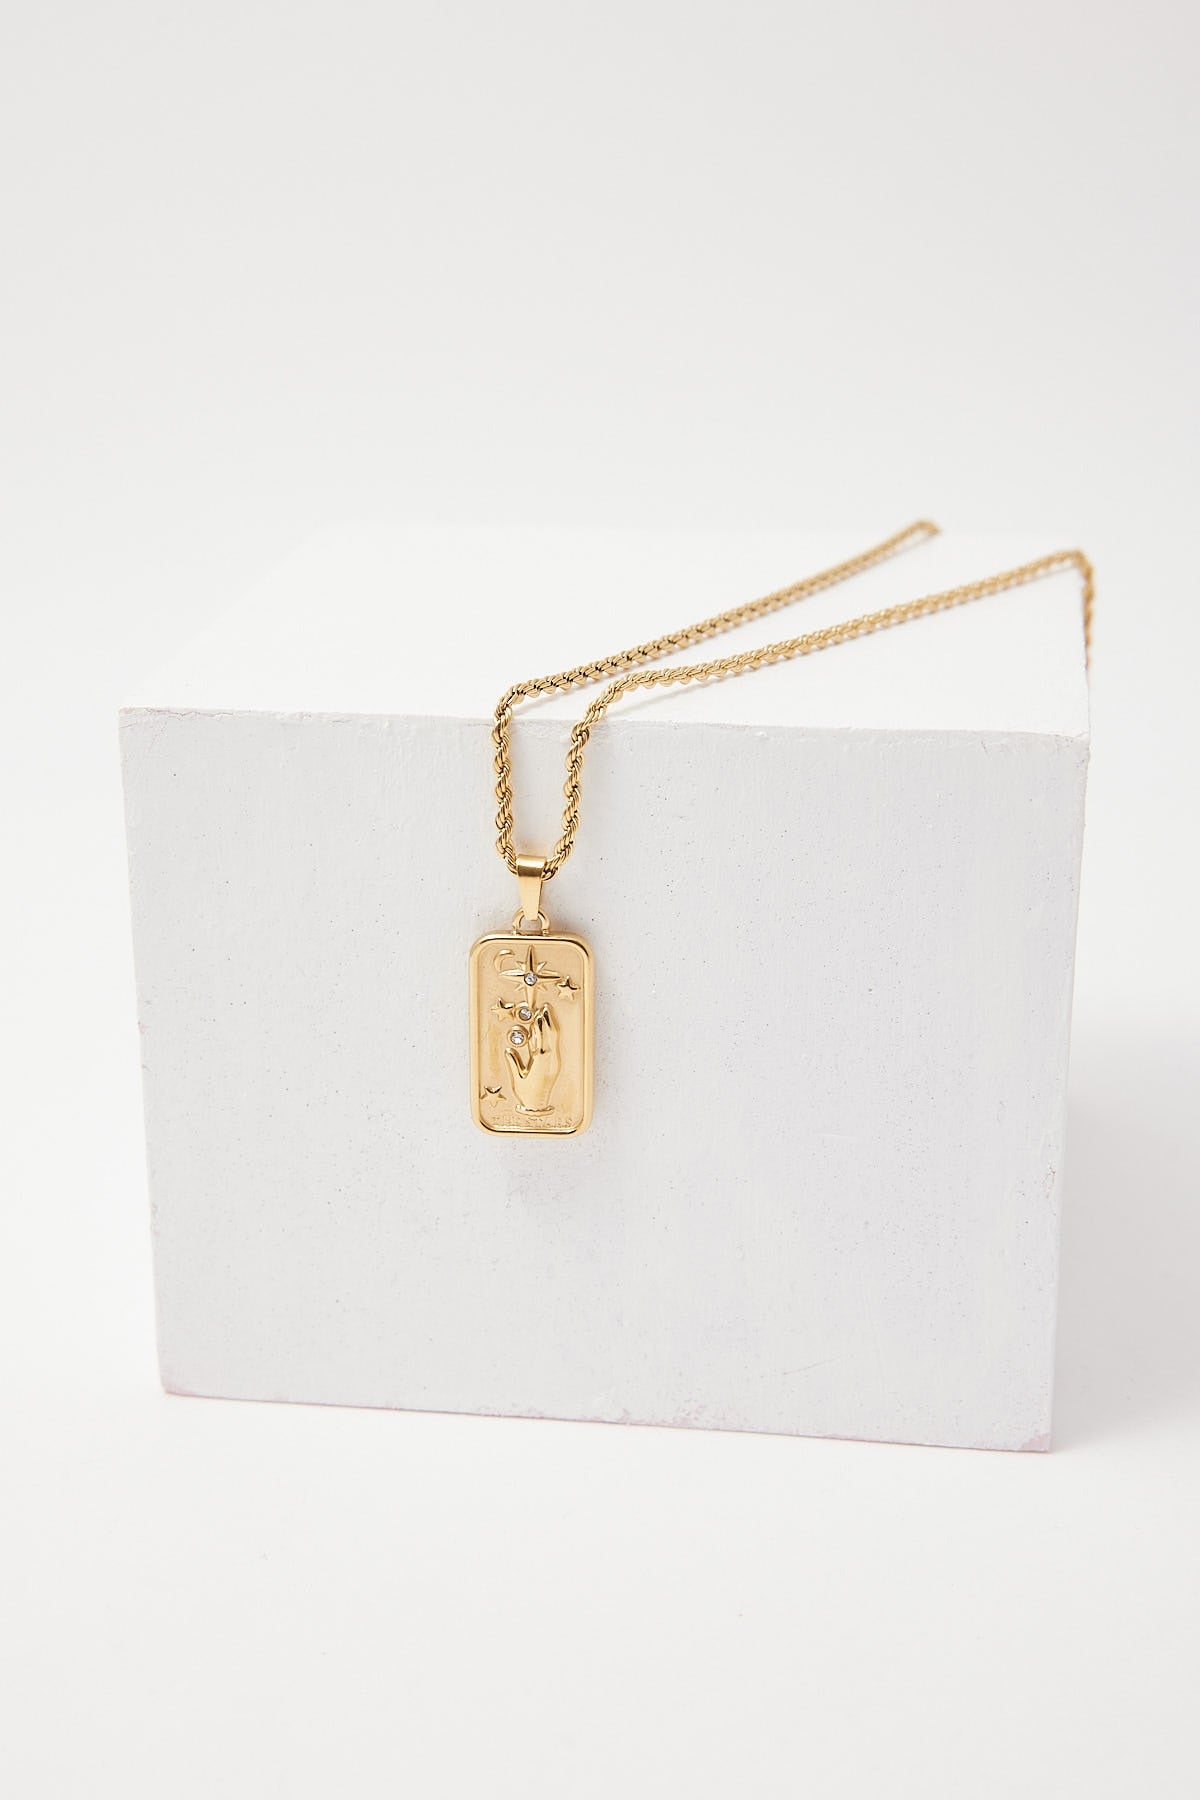 Perfect Stranger Rectangle Pendant Plated Necklace 18k Gold Plated